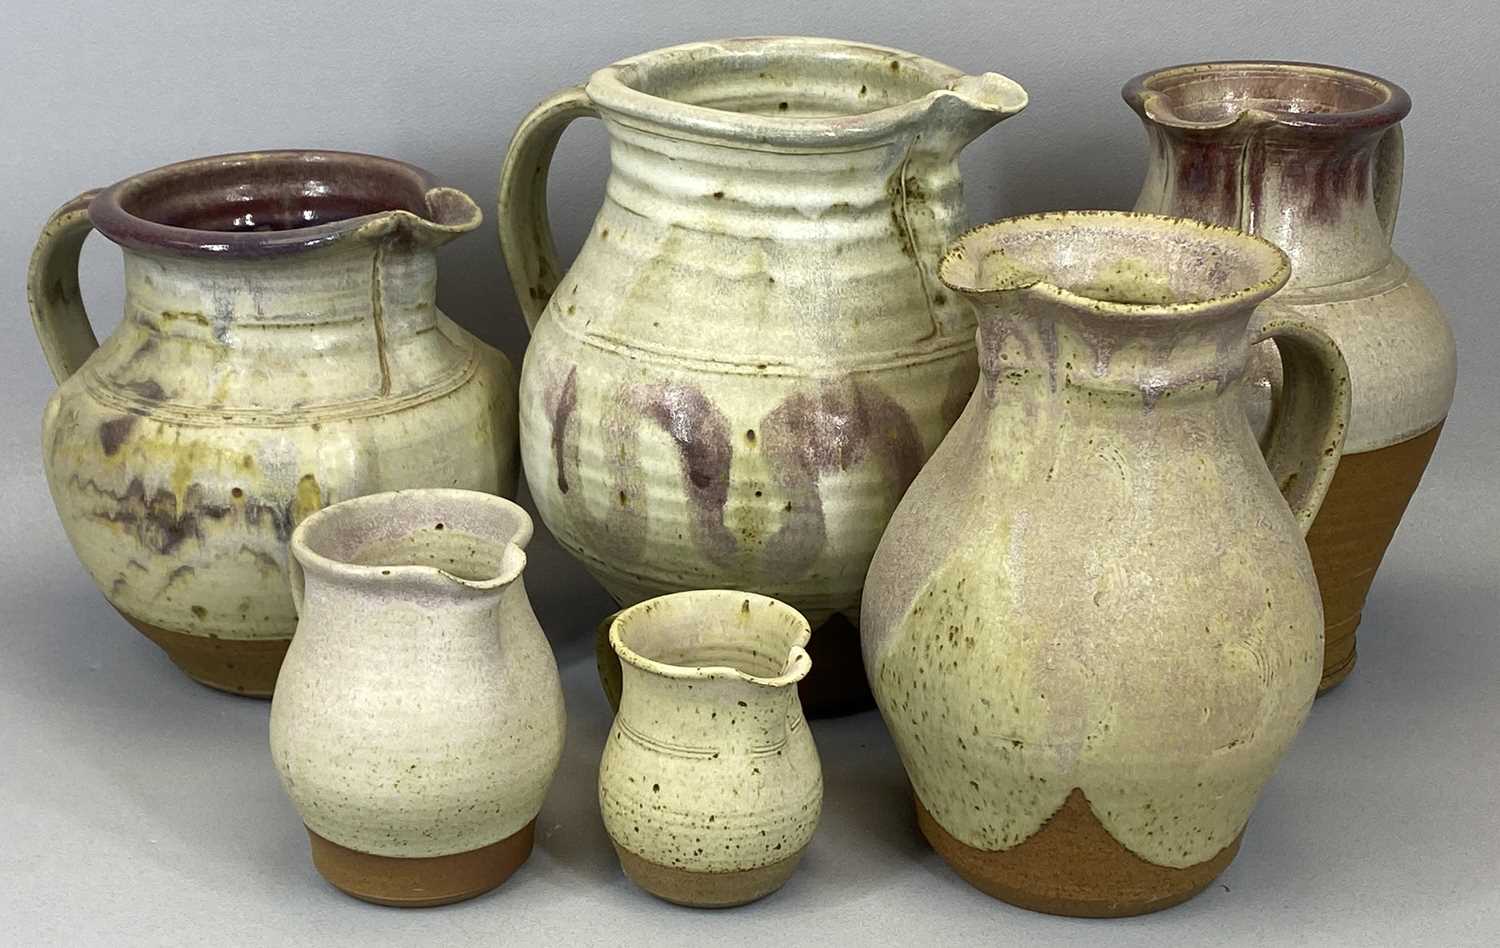 GROUP OF TREFOR OWEN OF MAENTWROG STONEWARE STUDIO POTTERY, including four harvest jugs, 28cms (h) - Image 2 of 3